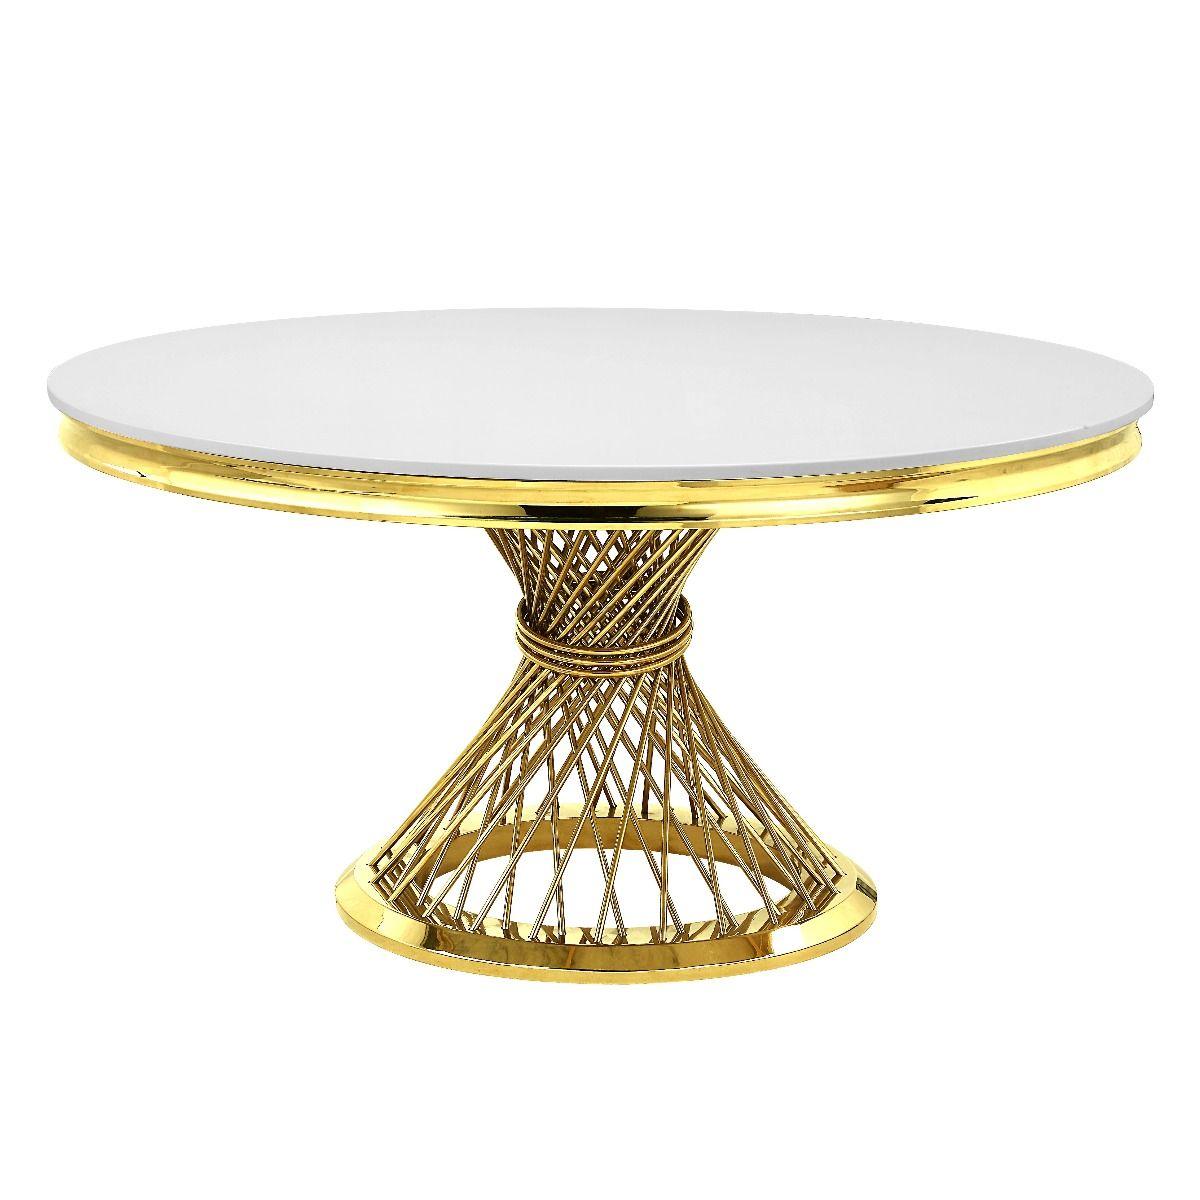 Modern, Classic Dining Table Fallon Round Dining Table DN01189-DT DN01189-DT in Gold 